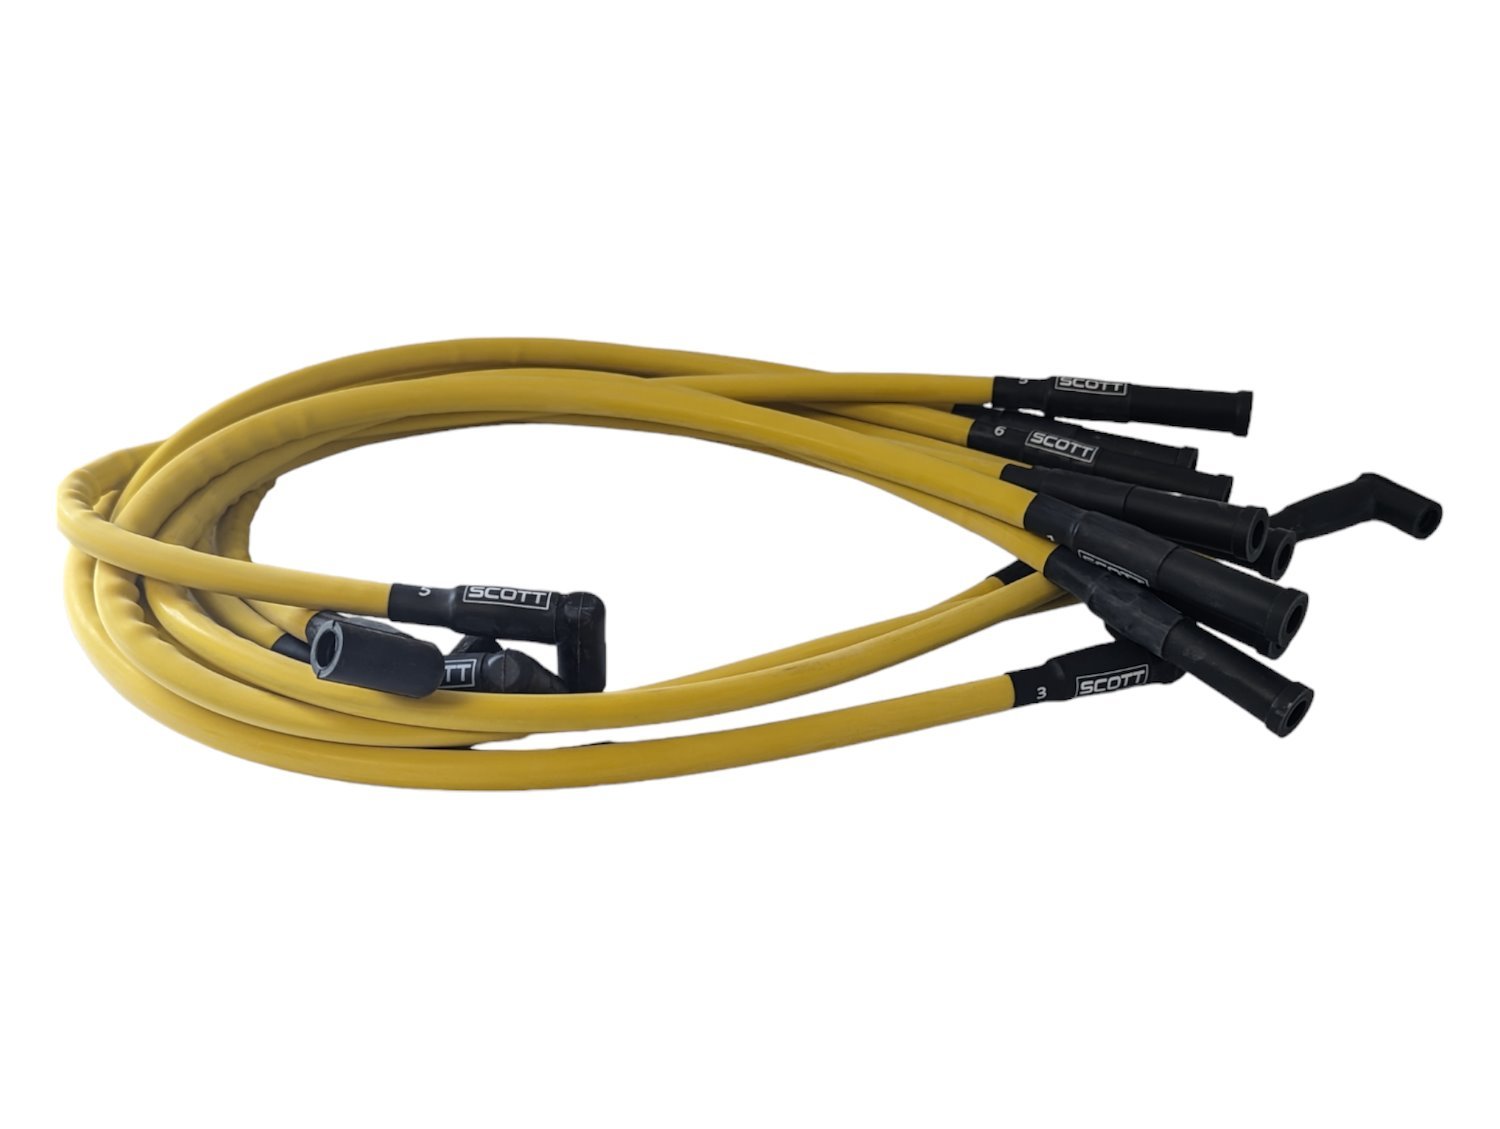 SPW-CH-660-7 High-Performance Silicone-Sleeved Spark Plug Wire Set for Small Block Dodge, Over Valve Cover [Yellow]